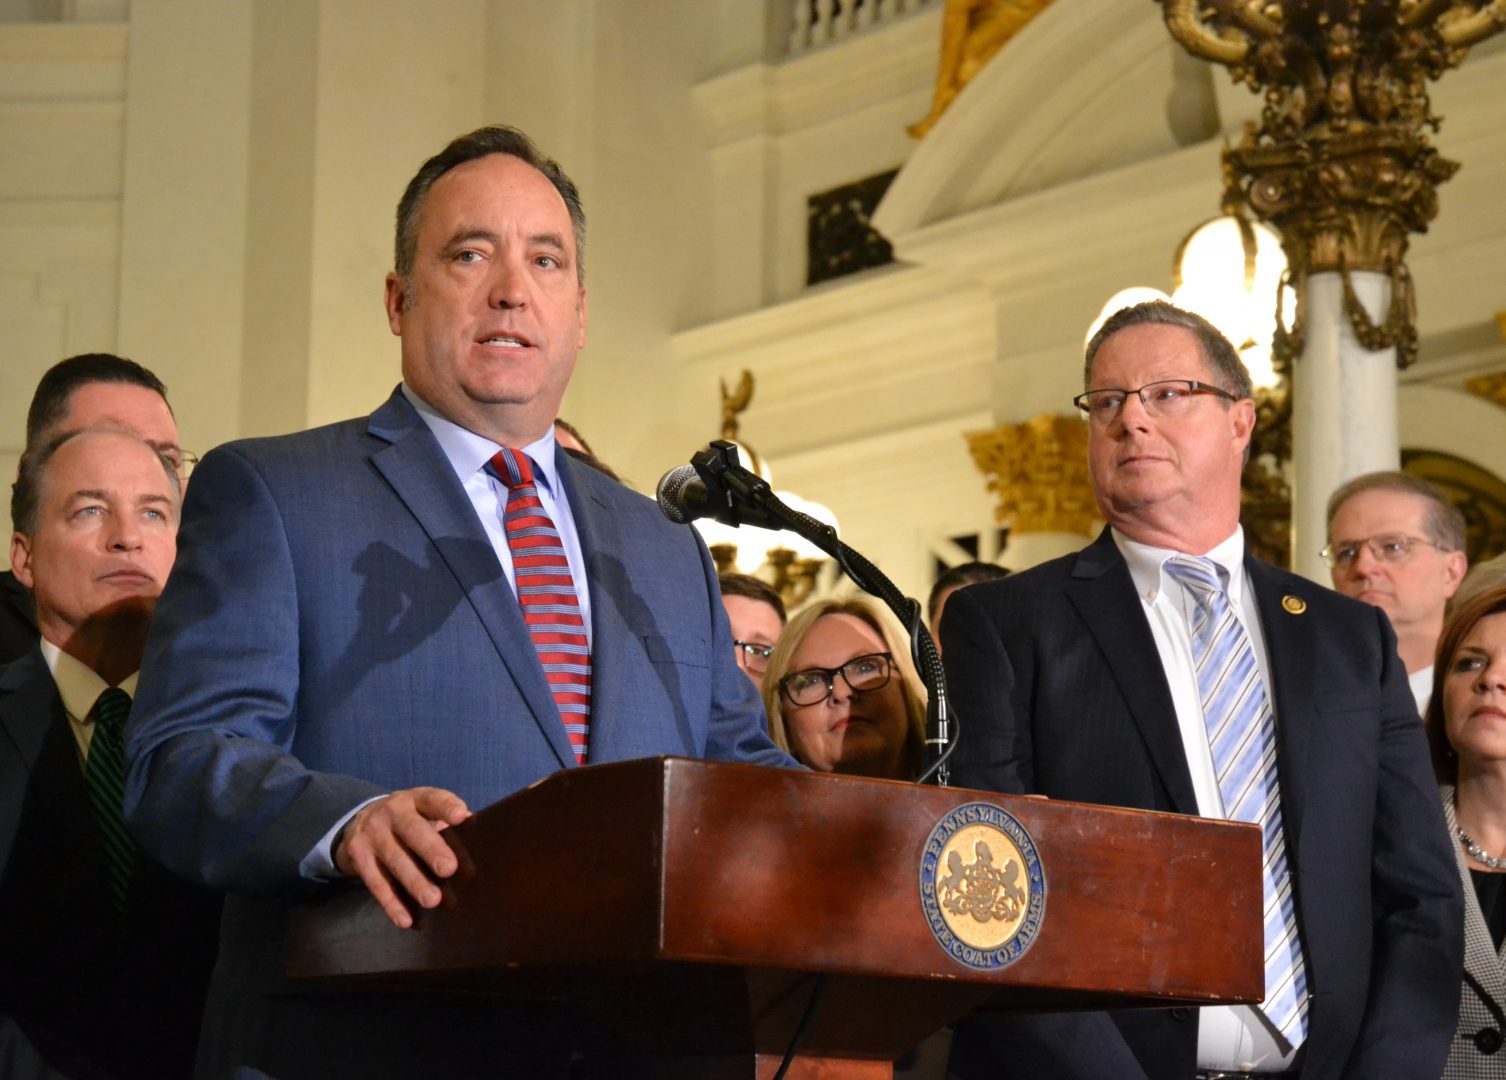 FILE PHOTO: Pennsylvania state Senate Majority Leader  Jake Corman speaks at an event inside the state Capitol.